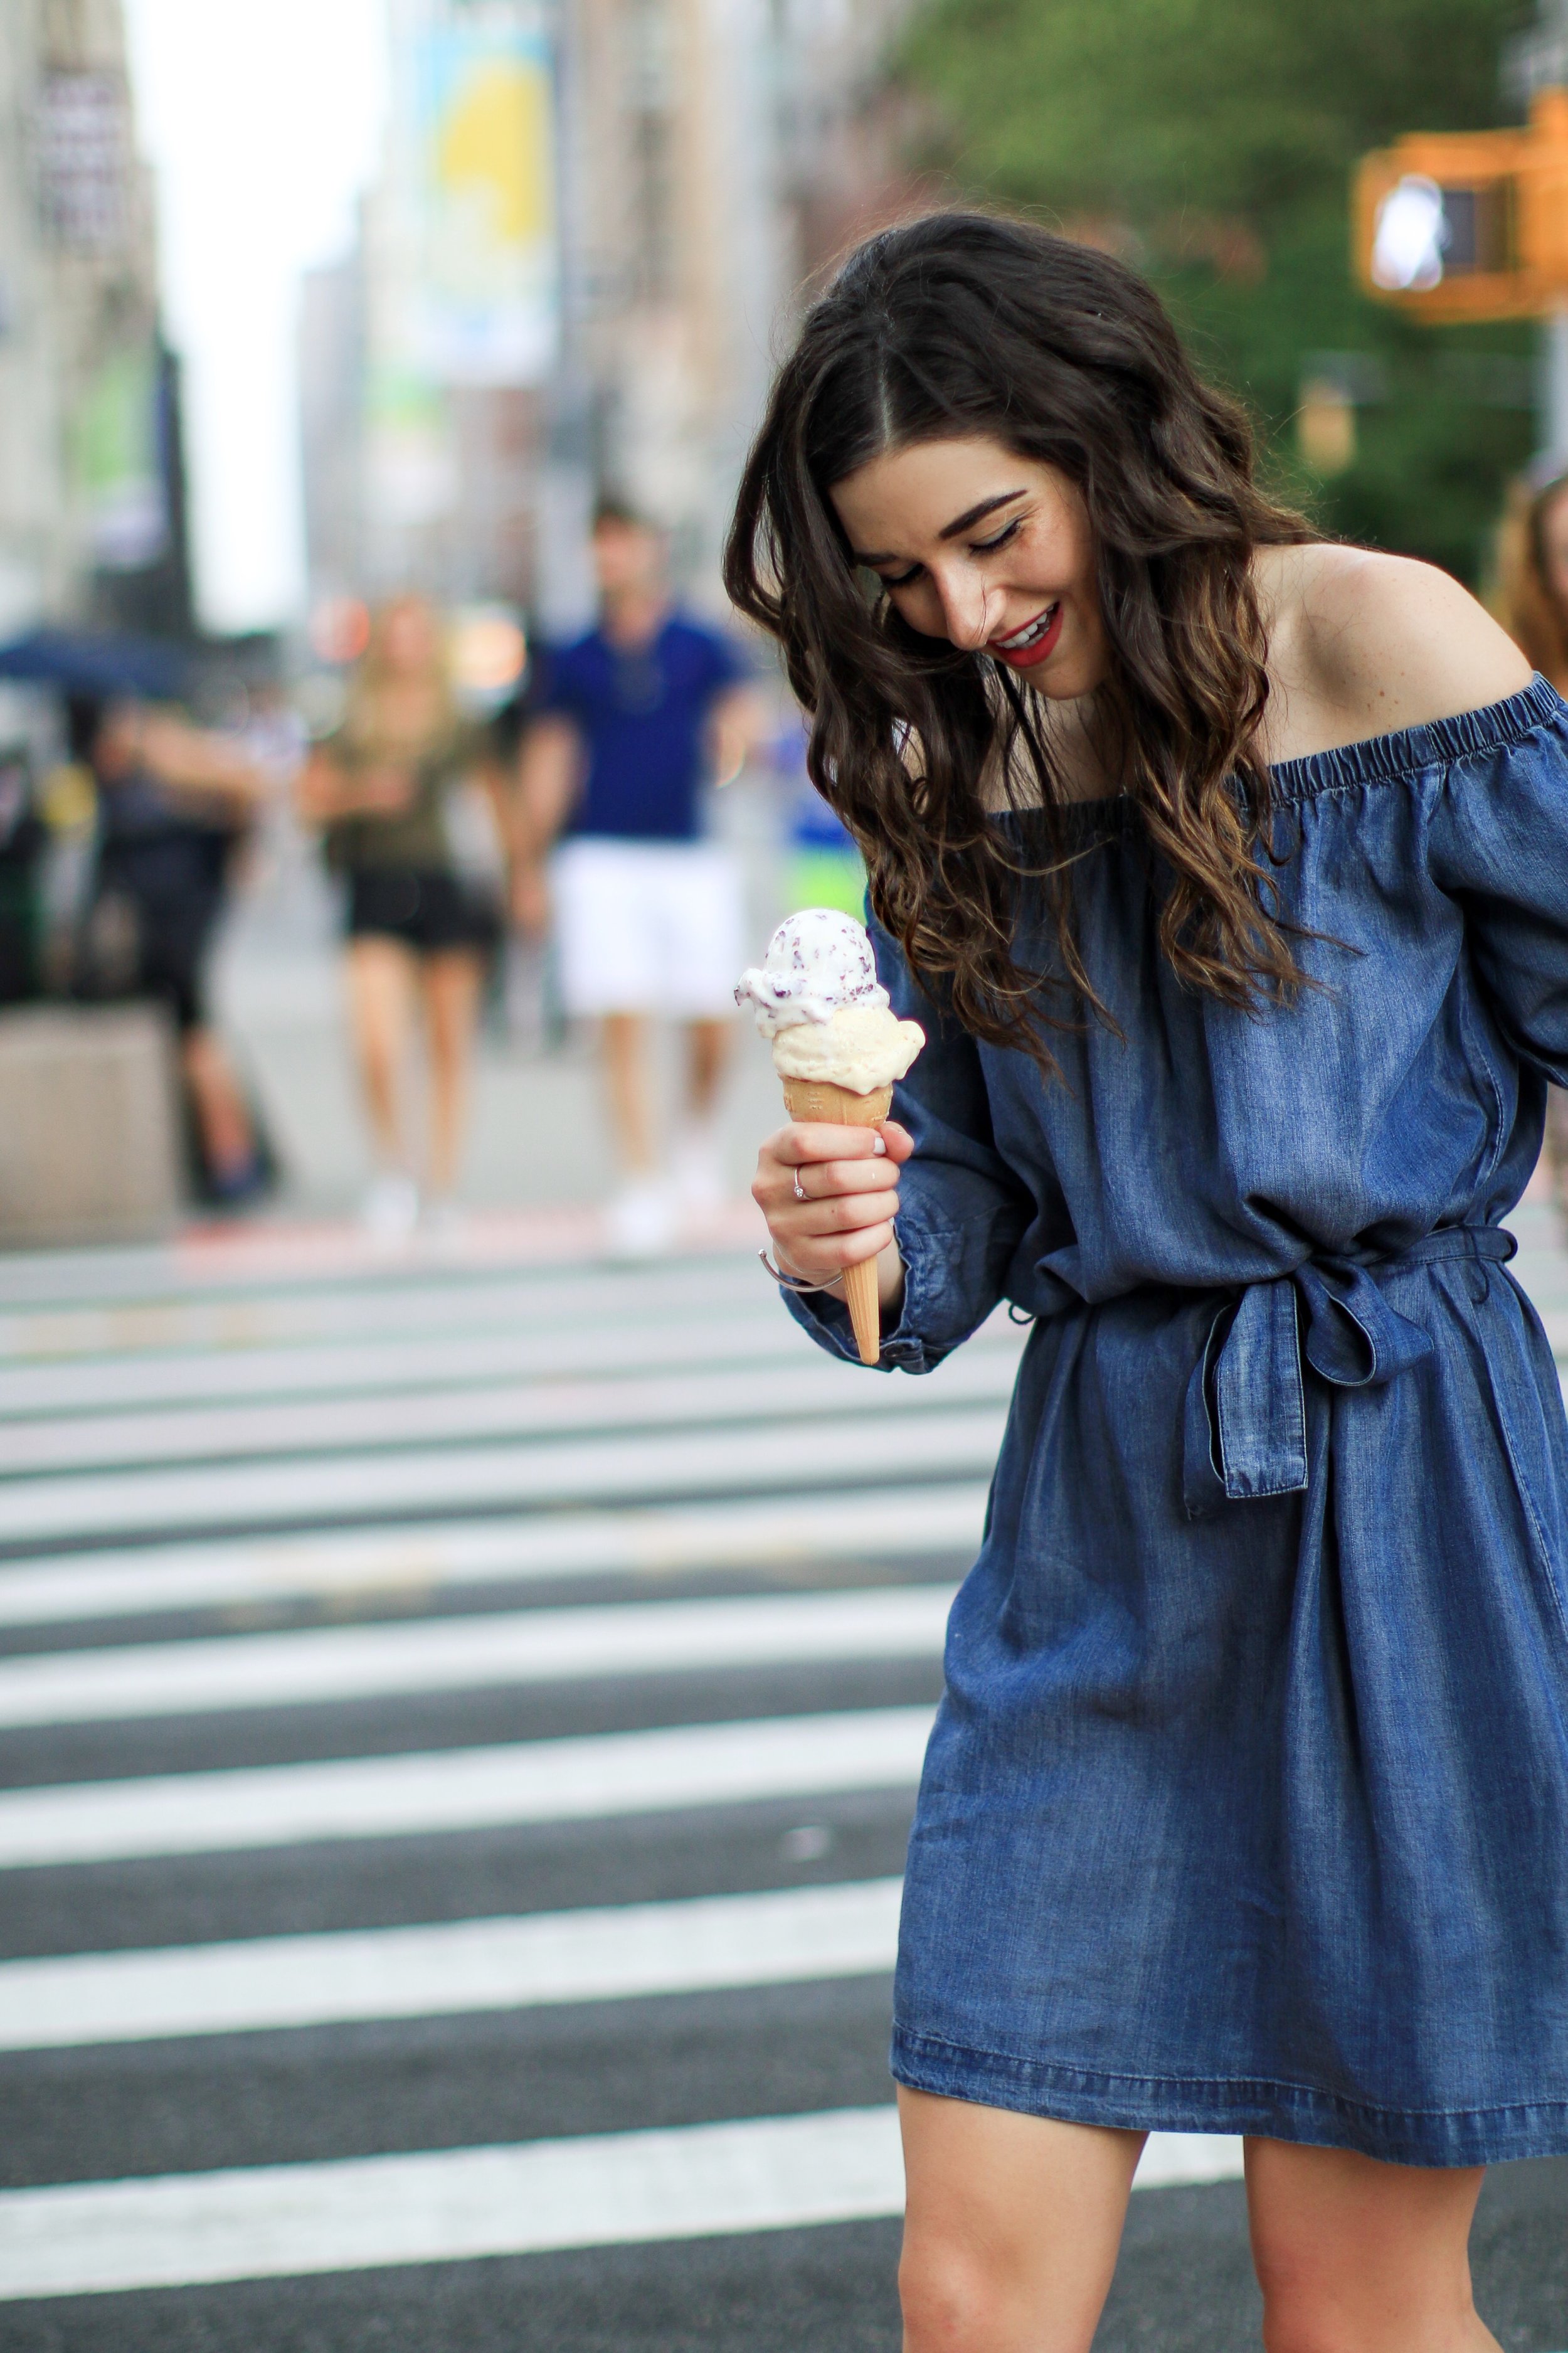 Trescool Chambray Dress 10 Ways To Overcome Writer's Block Esther Santer Fashion Blog NYC Street Style Blogger Outfit OOTD Trendy Denim Red Shoes Lace Up Girl Women Cold Shoulder Summer Beautiful  Pretty Shopping French Connection Hair City Photoshoot.JPG